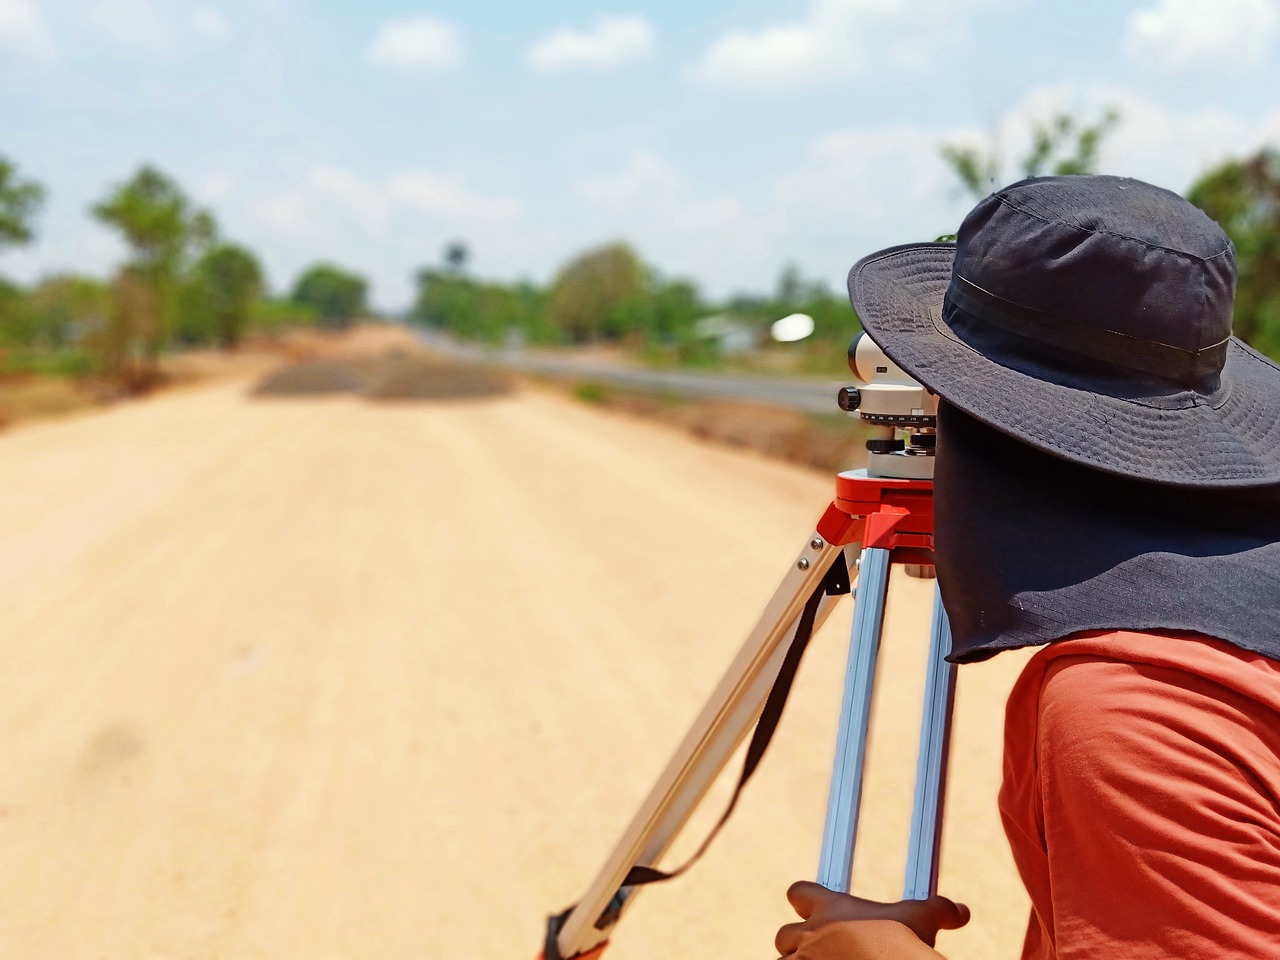 Land survey will let you know where you legally own